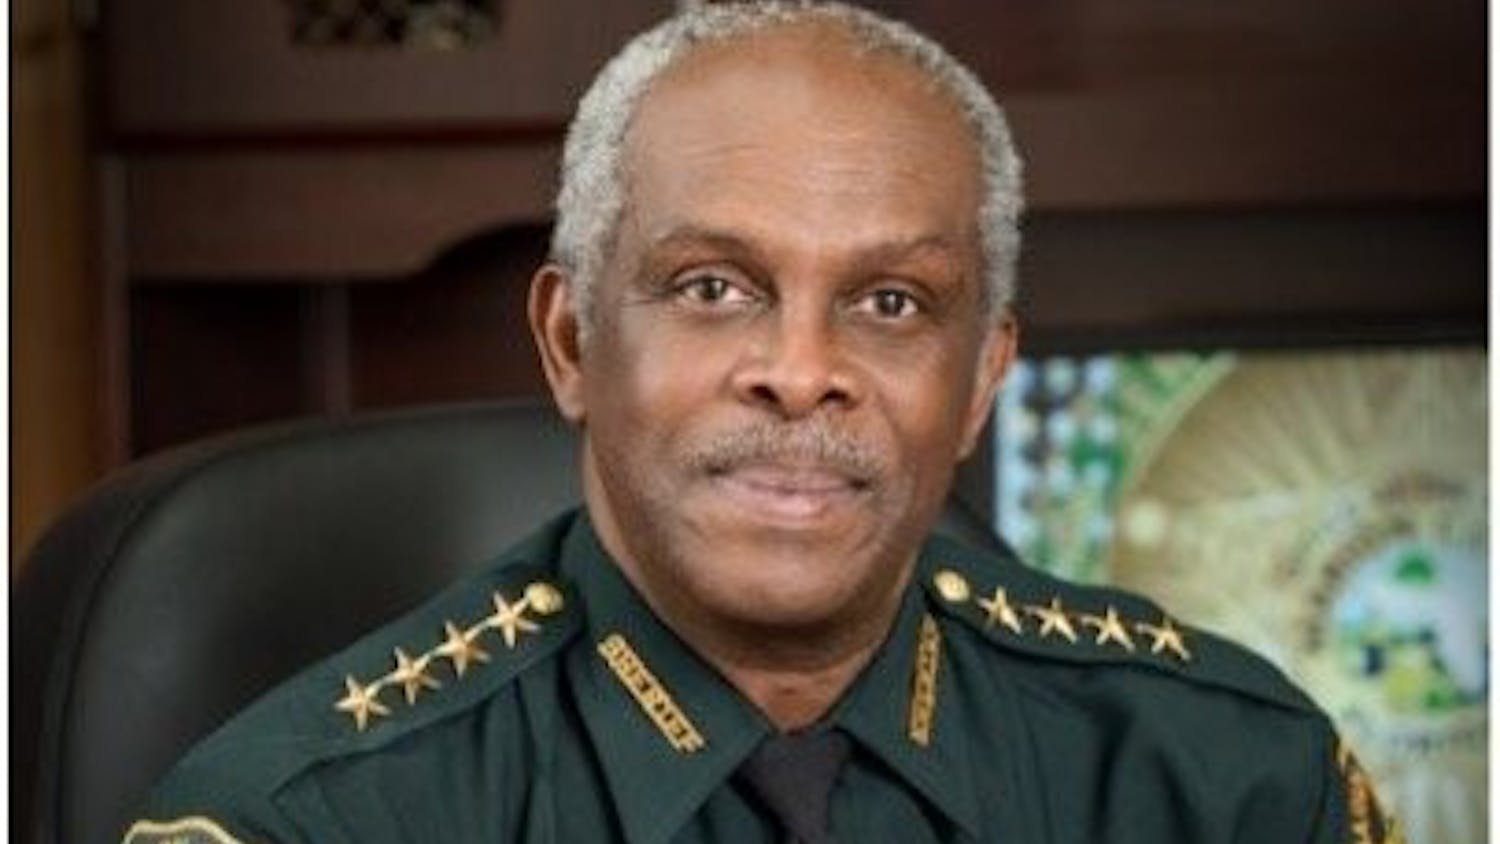 Sheriff Emery Gainey is pictured above.